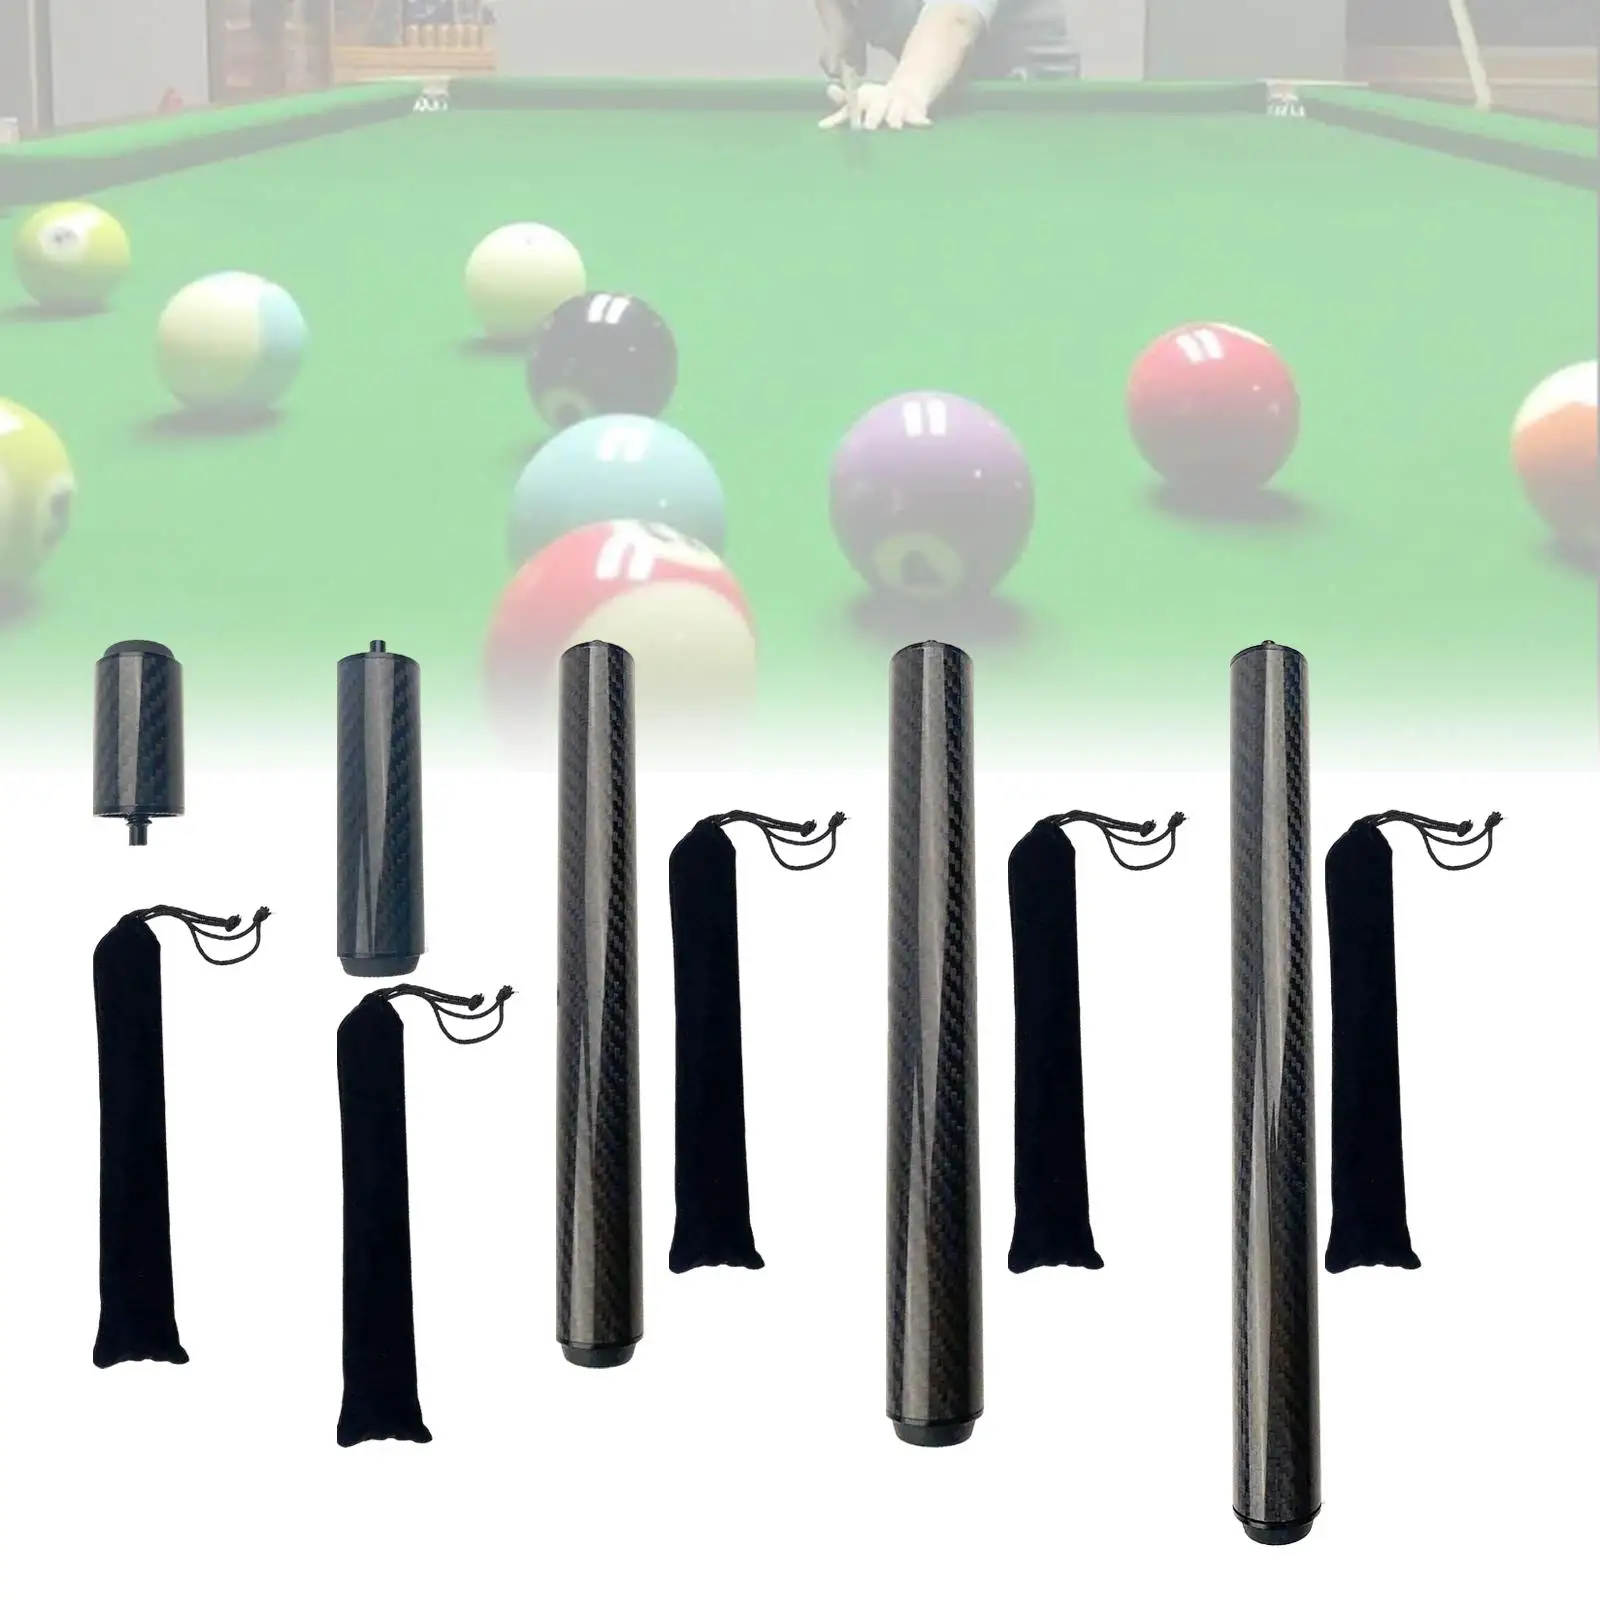 Billiards Pool Cue Extension Billiards Accessories Pool Cue Weight Screw Weights Replacement Cue Stick Extenders for Lovers